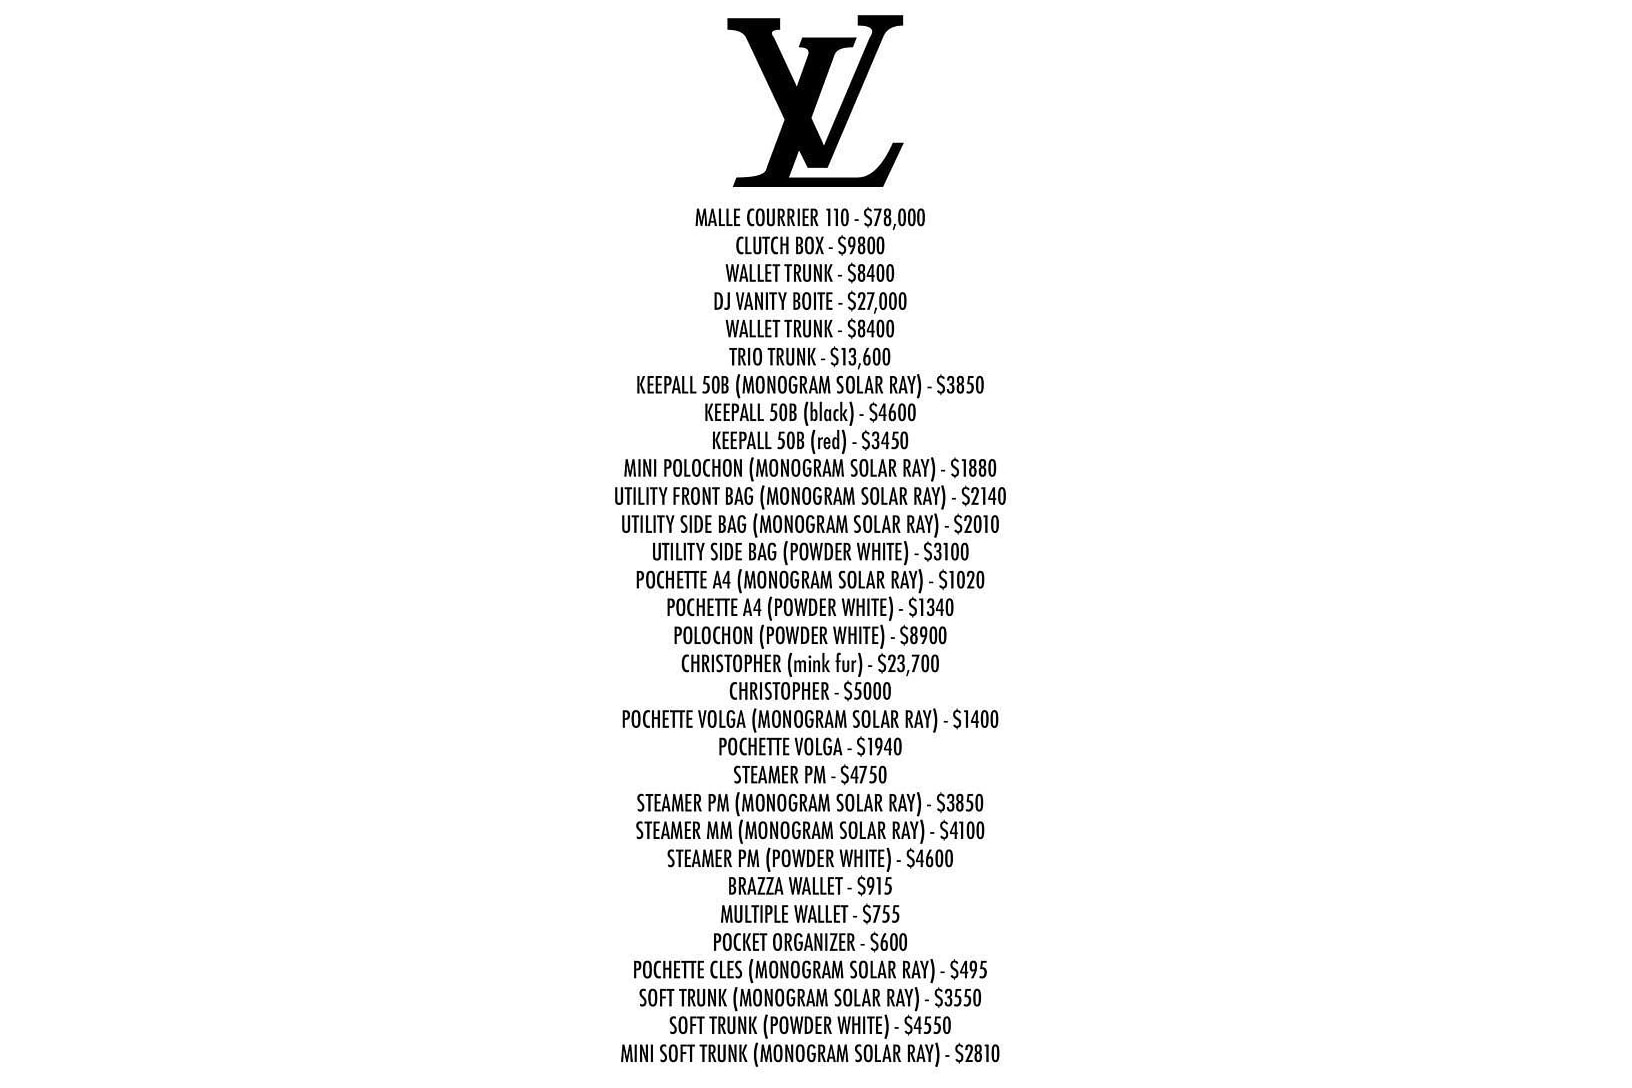 Here's a Price List of Virgil Abloh's Louis Vuitton Spring Summer